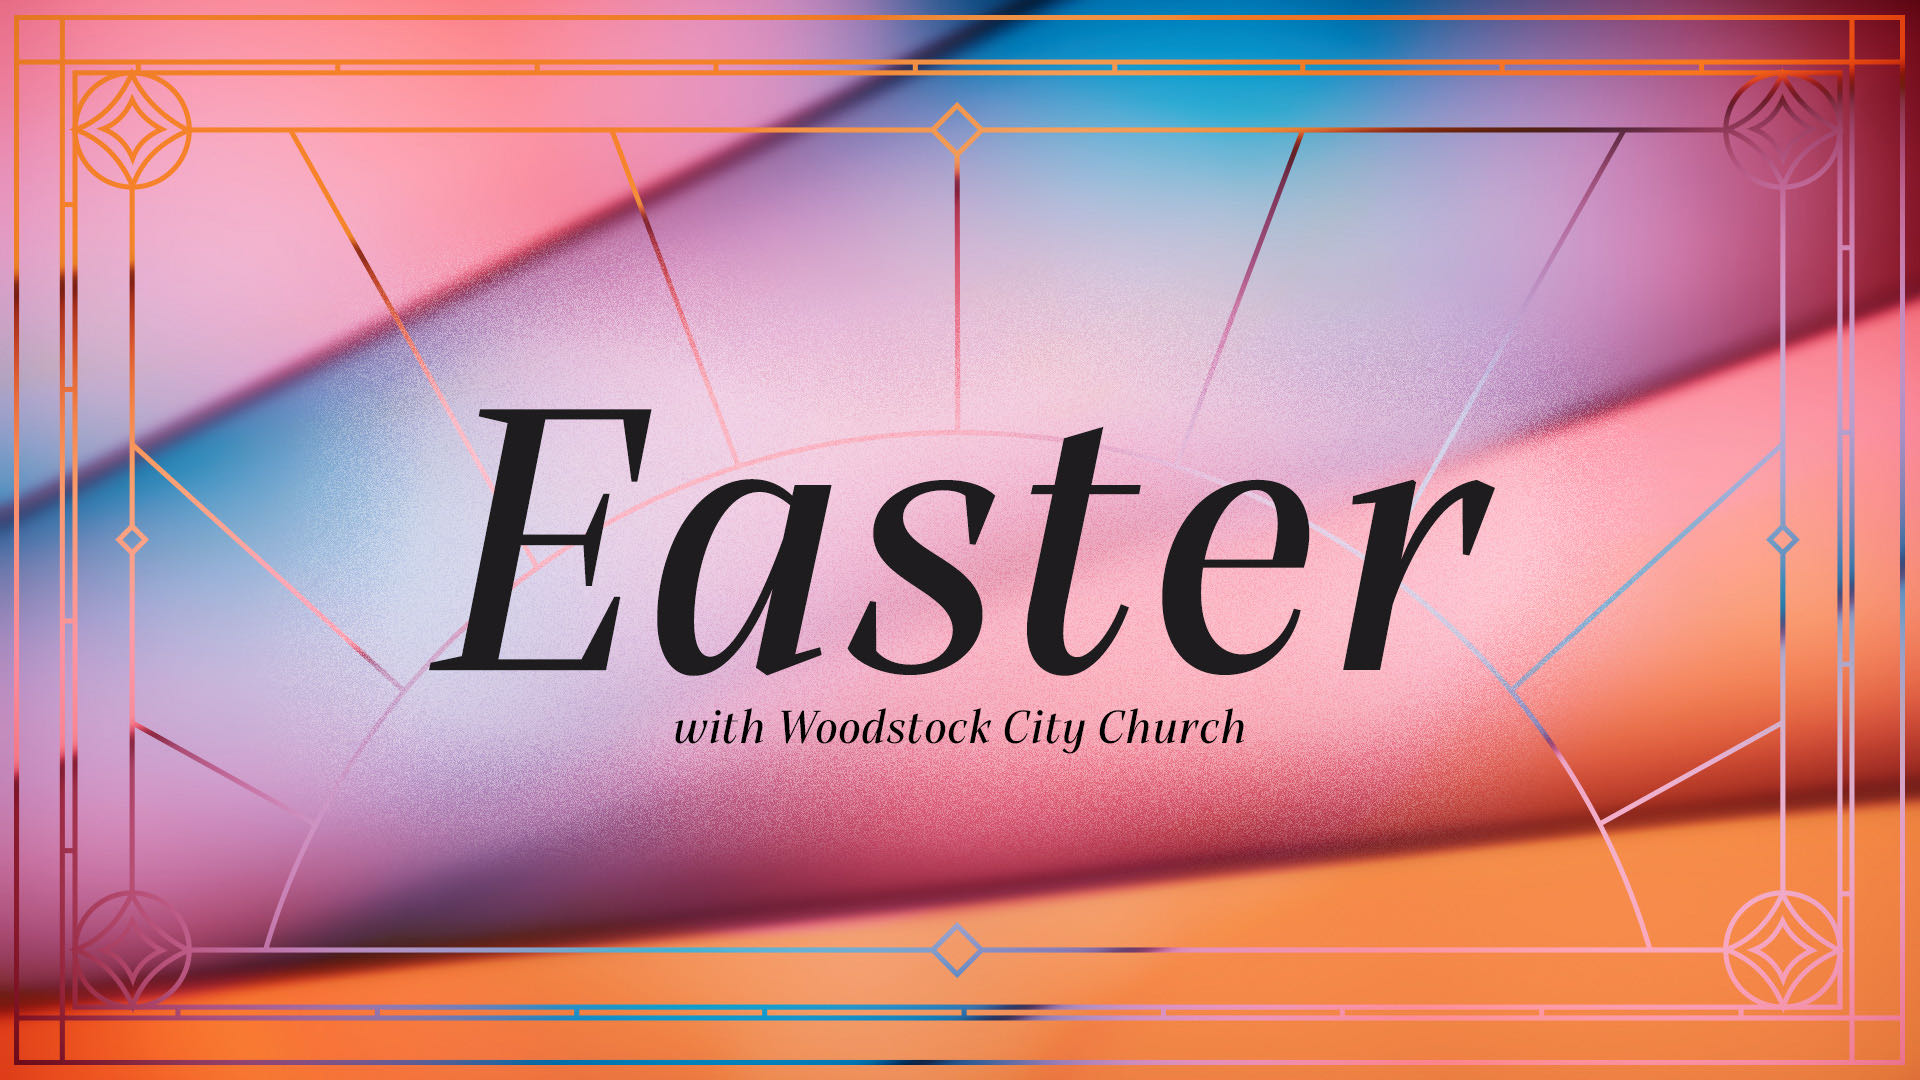 Easter with Woodstock City